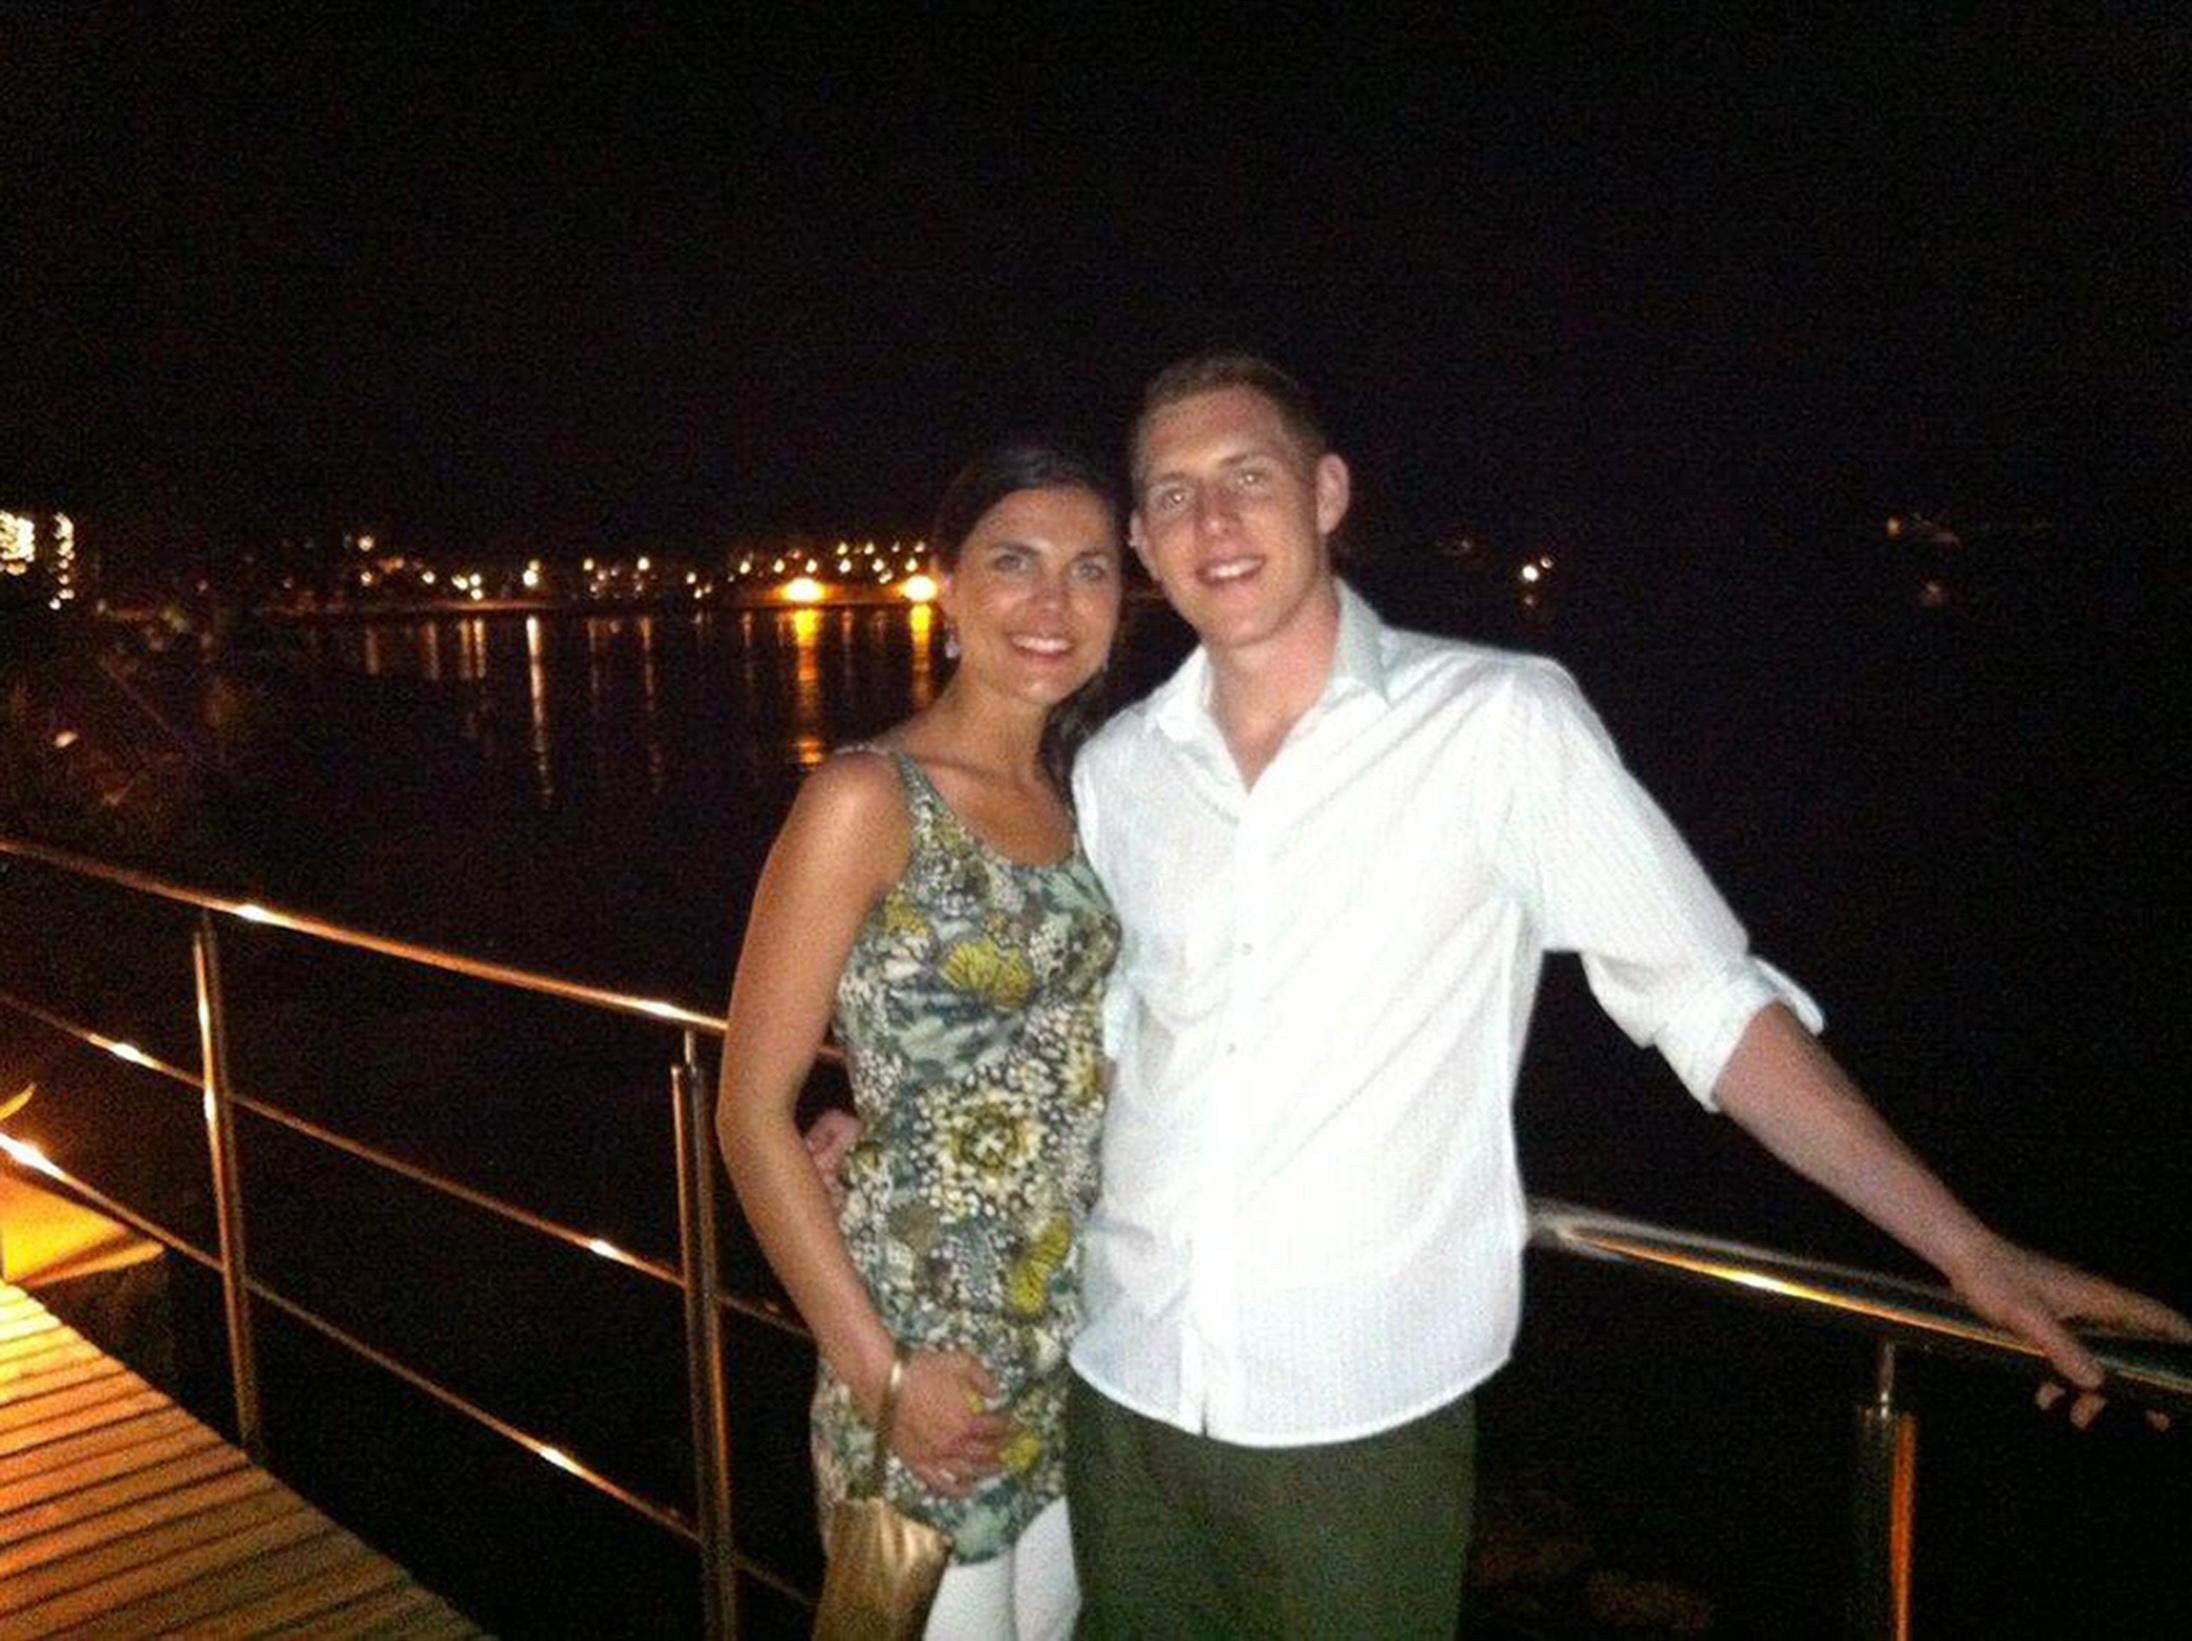 Mr and Mrs McAreavey during their honeymoon